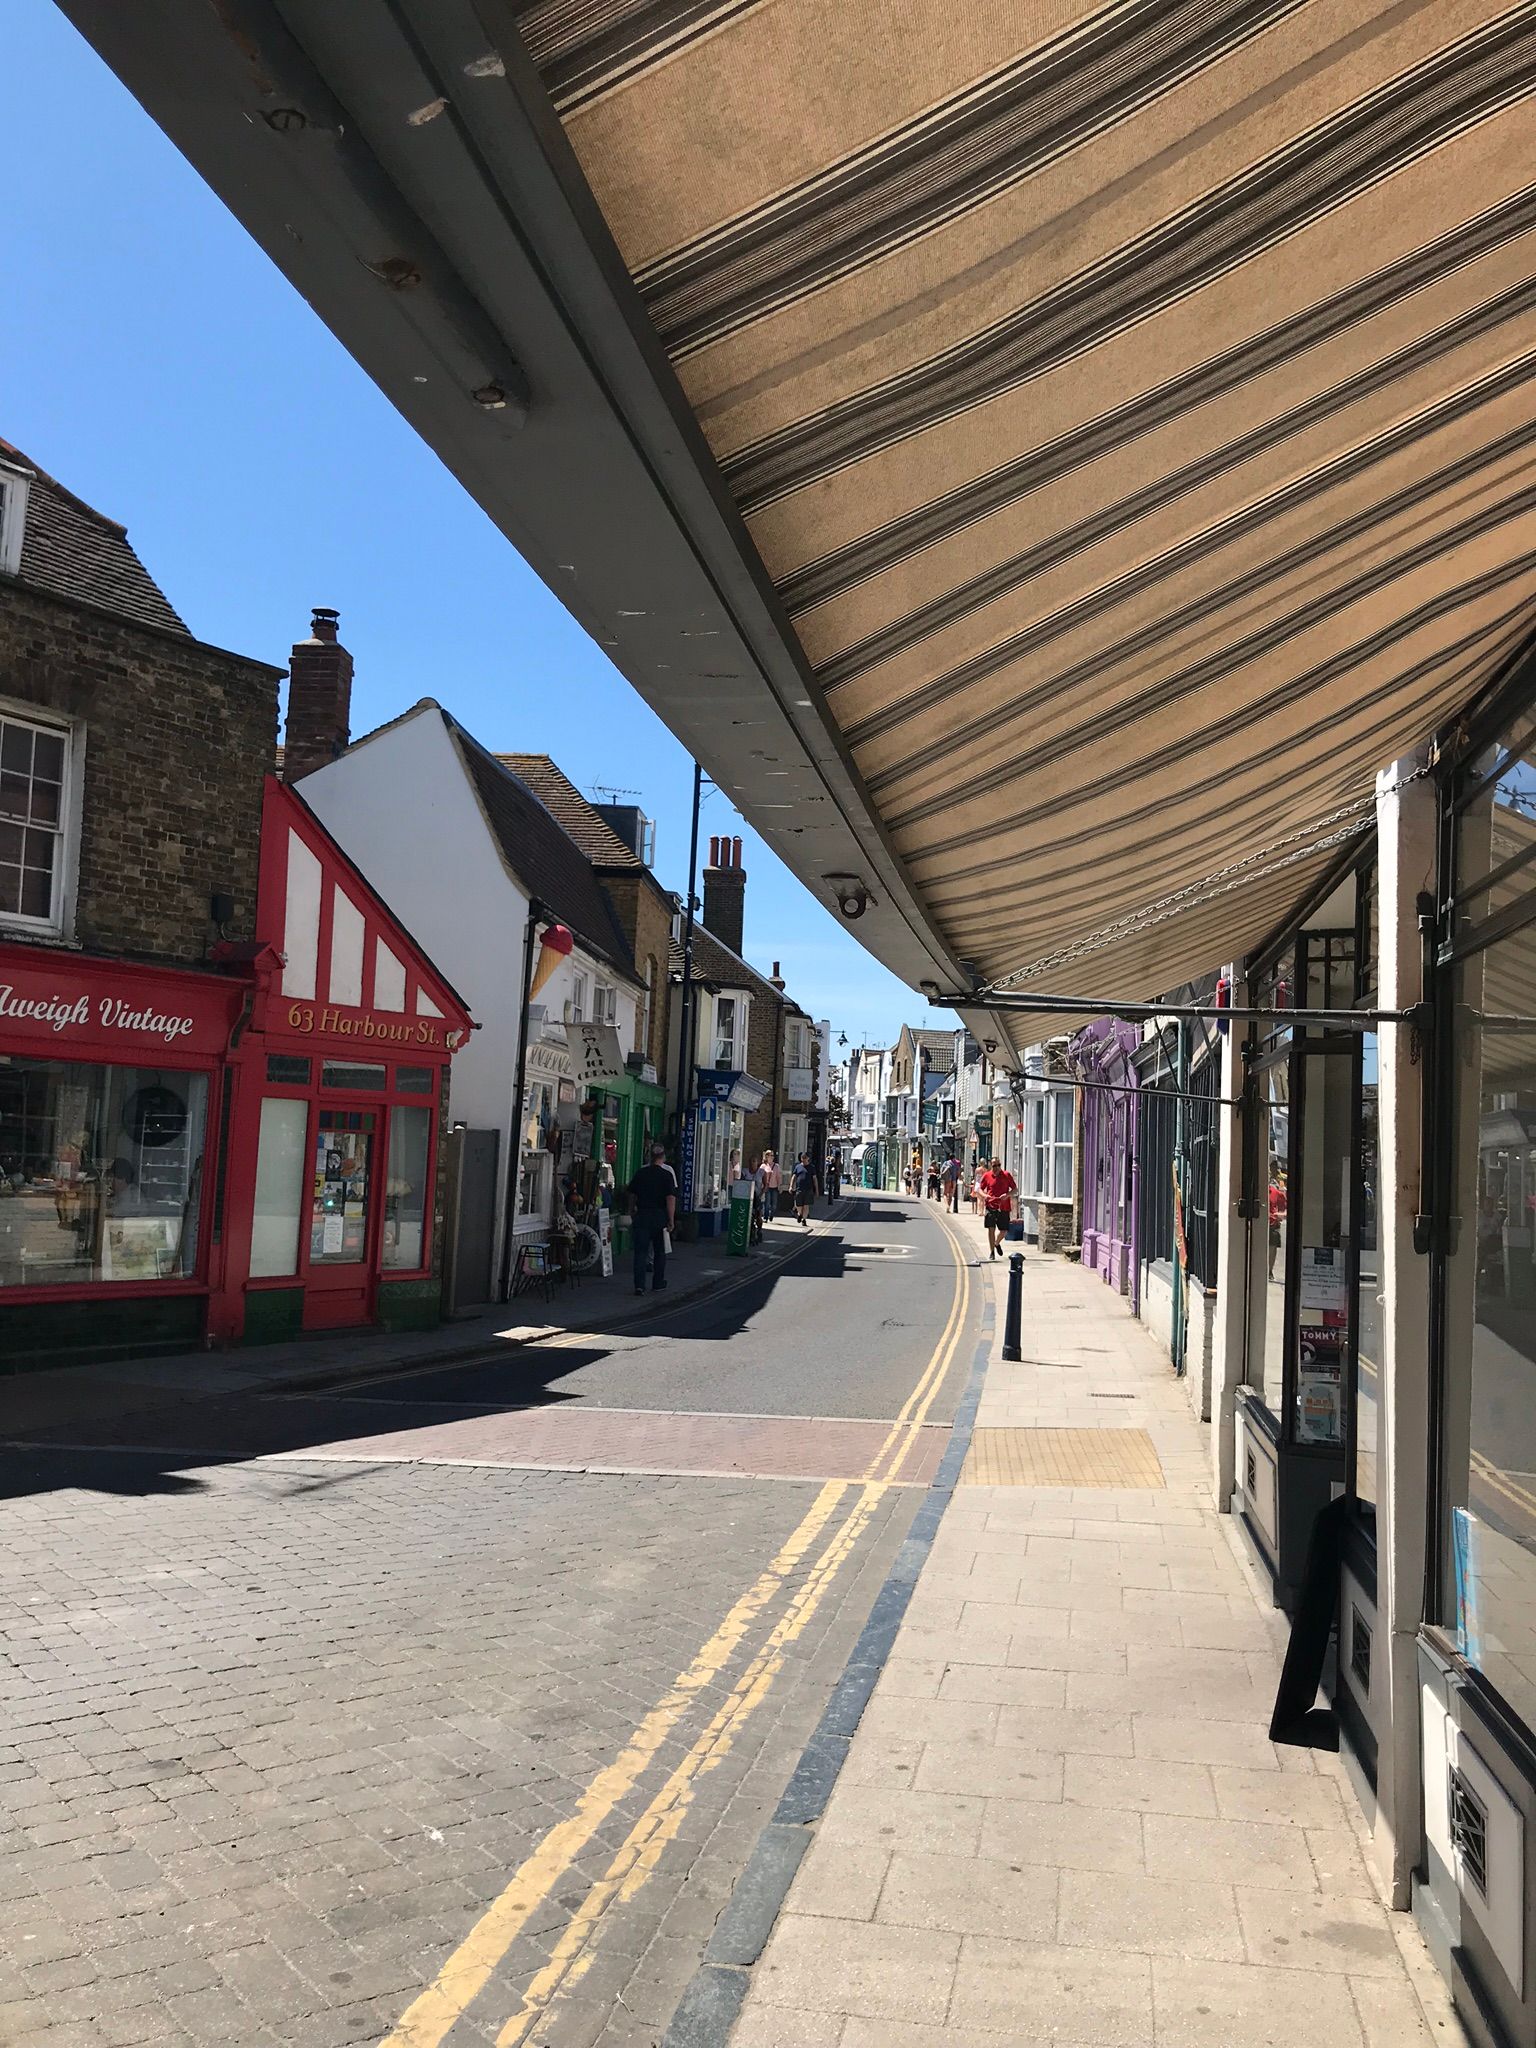 Whitstable town centre shops and high street